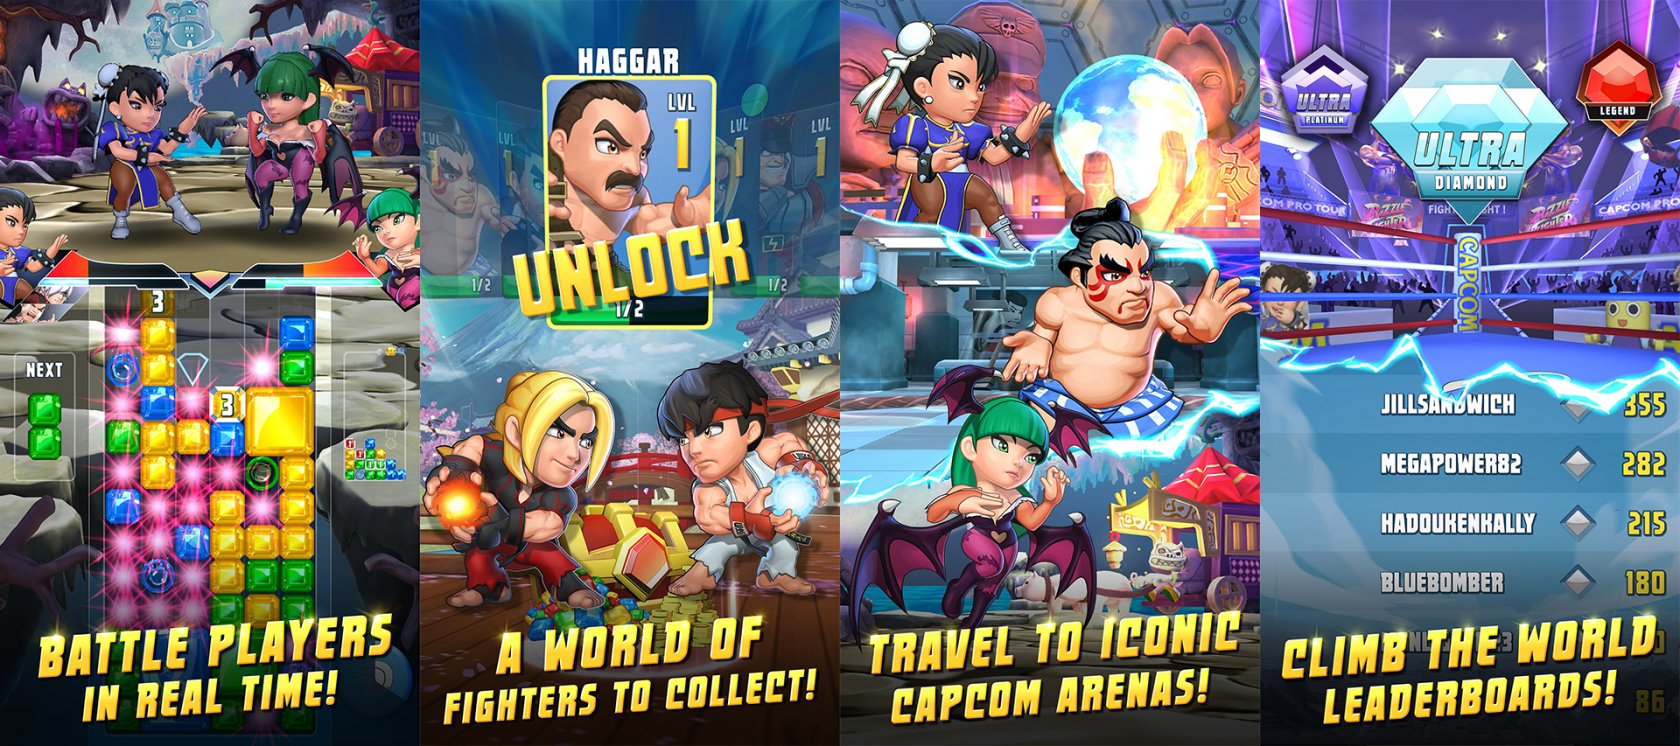 http://www.gamelegends.it/wp-content/uploads/2017/09/capcom-puzzle-fighters-mobile.jpg